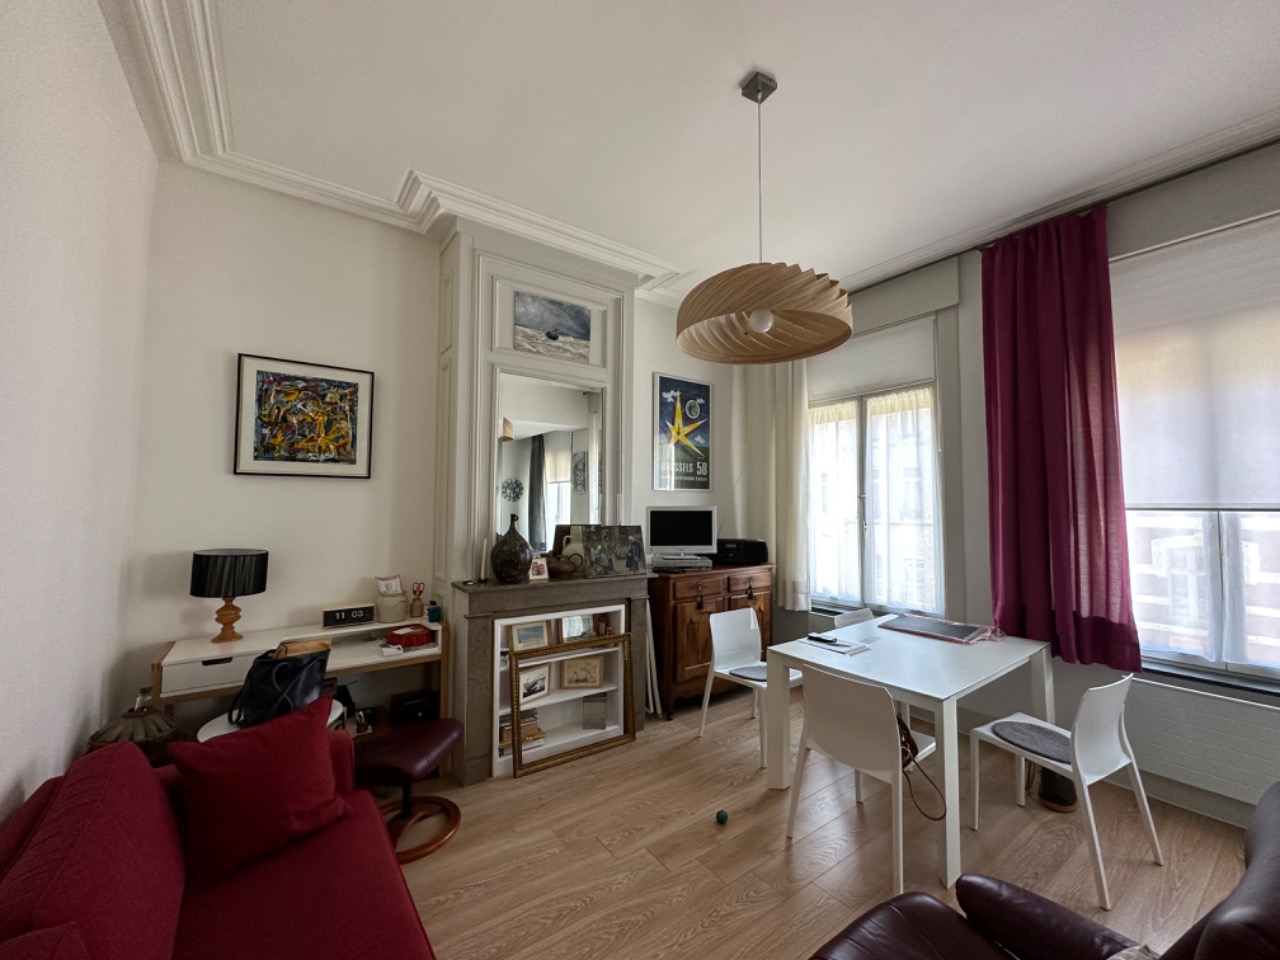 Vente appartement 59000 Lille - Appartement type 2 Lille